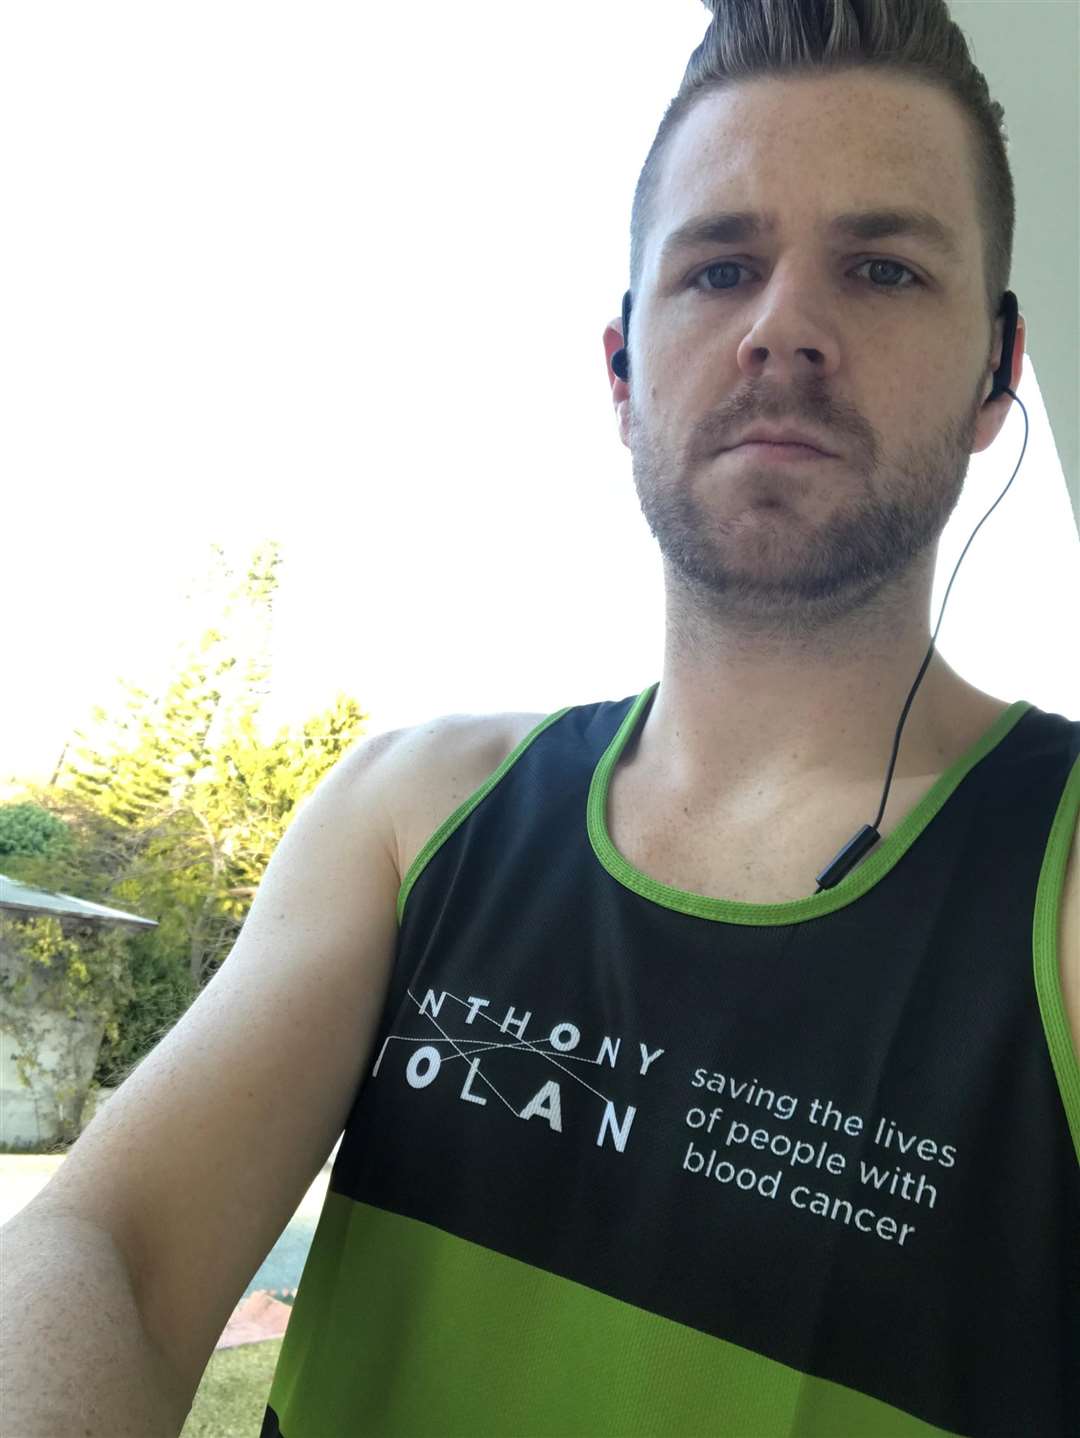 Marathon runner Philip Powell is running for blood cancer charity Anthony Nolan.